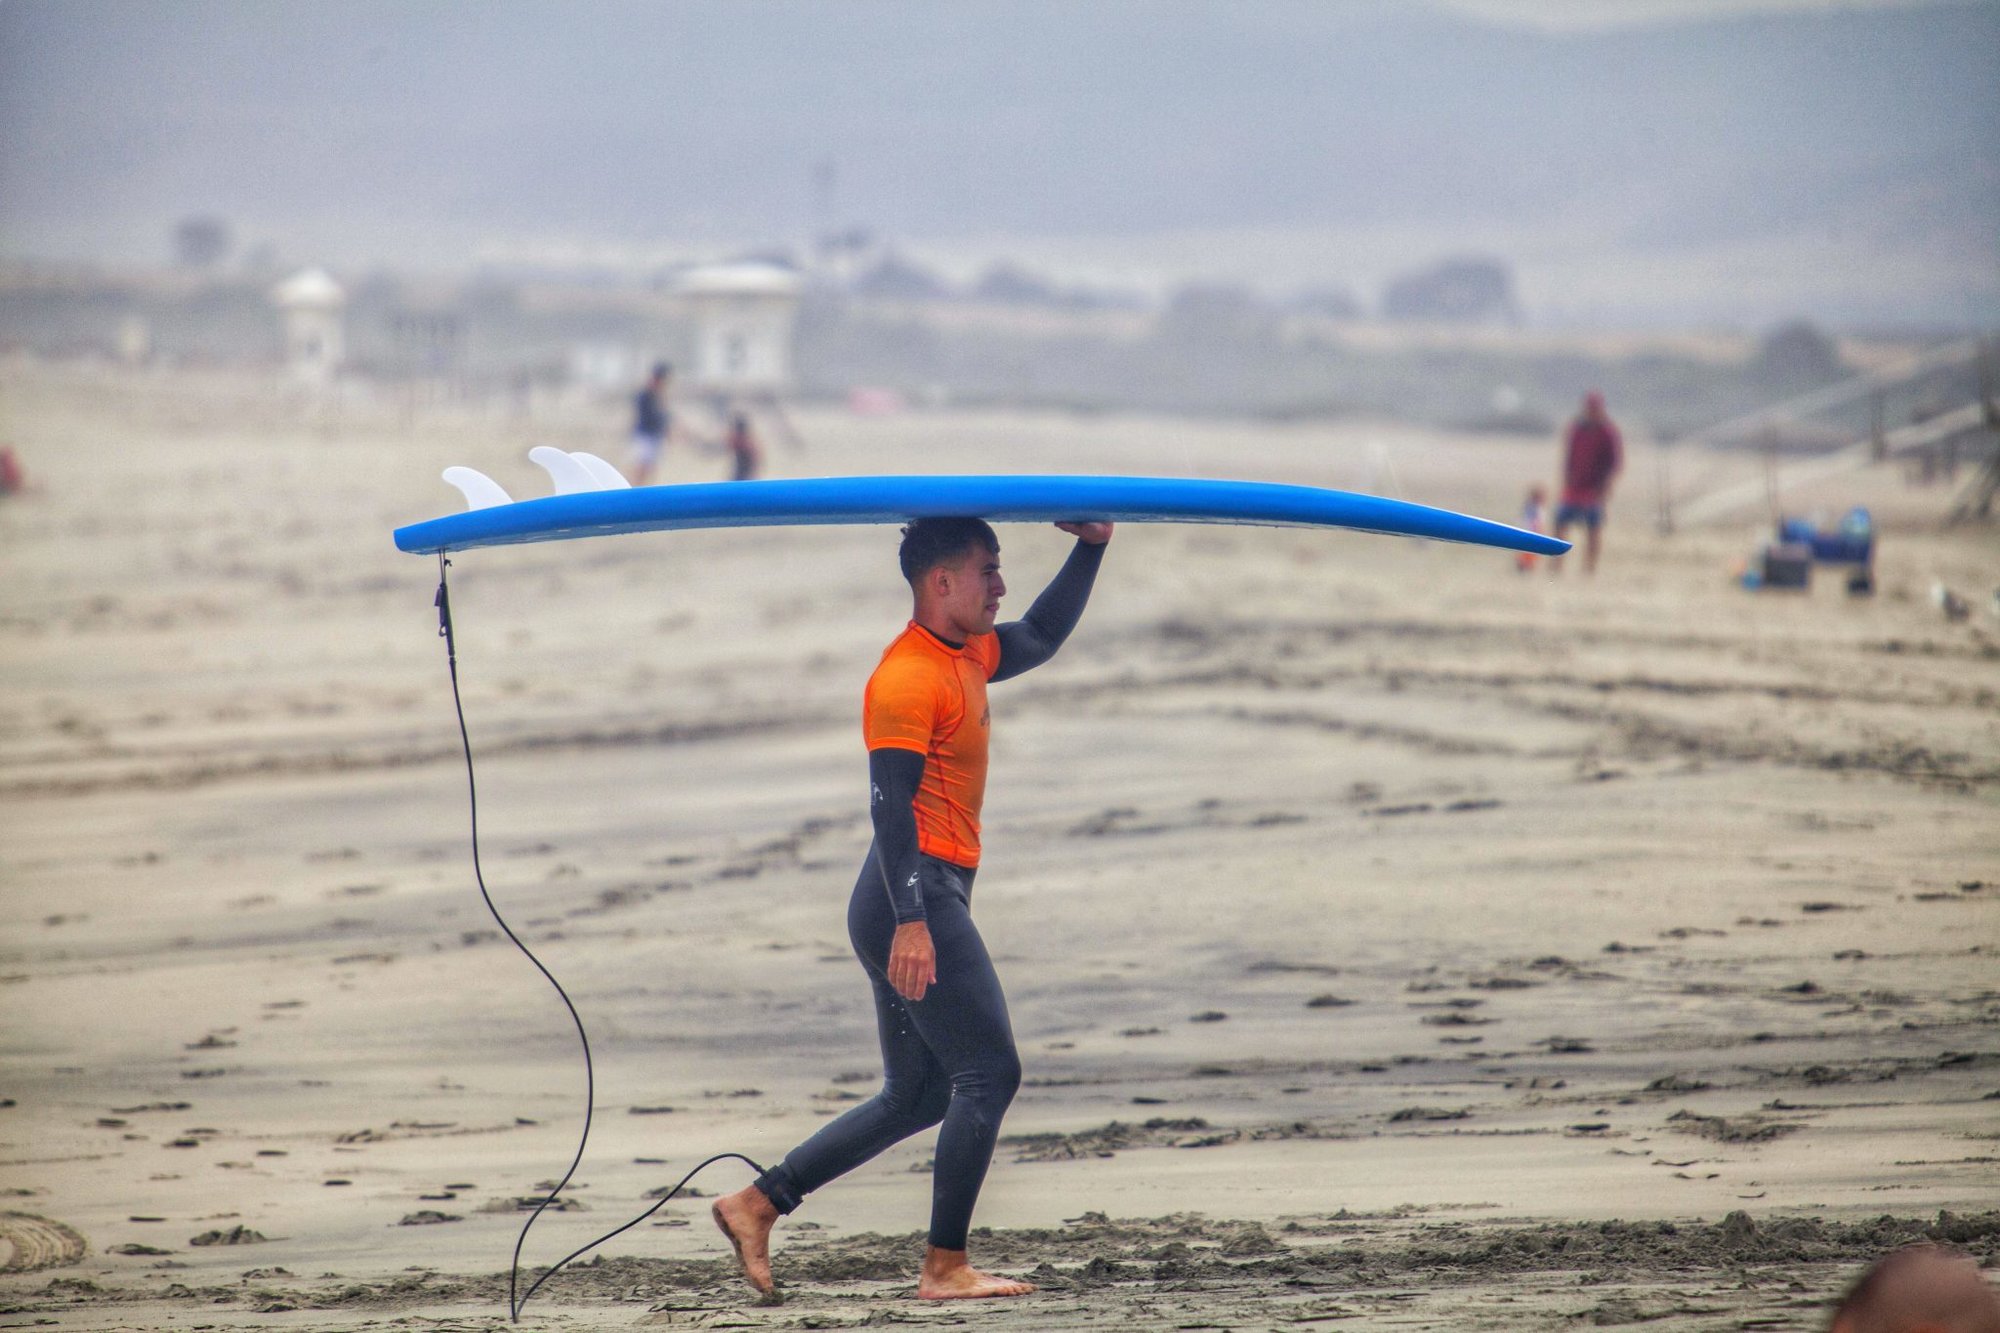 U.S. Marine carries a surfboard after surfing during the annual Commanding General’s (CG’s) Cup Surfing Competition, at the Del Mar Beach Resort on Marine Corps Base Camp Pendleton, California, June 19, 2019. The CG’s Cup is a series of competitive sporting events, which promotes combat readiness, resiliency, esprit de corps, leadership, teamwork and loyalty for active-duty Marines and Sailors through participation in sports.  (Photo by Ismael Pena)